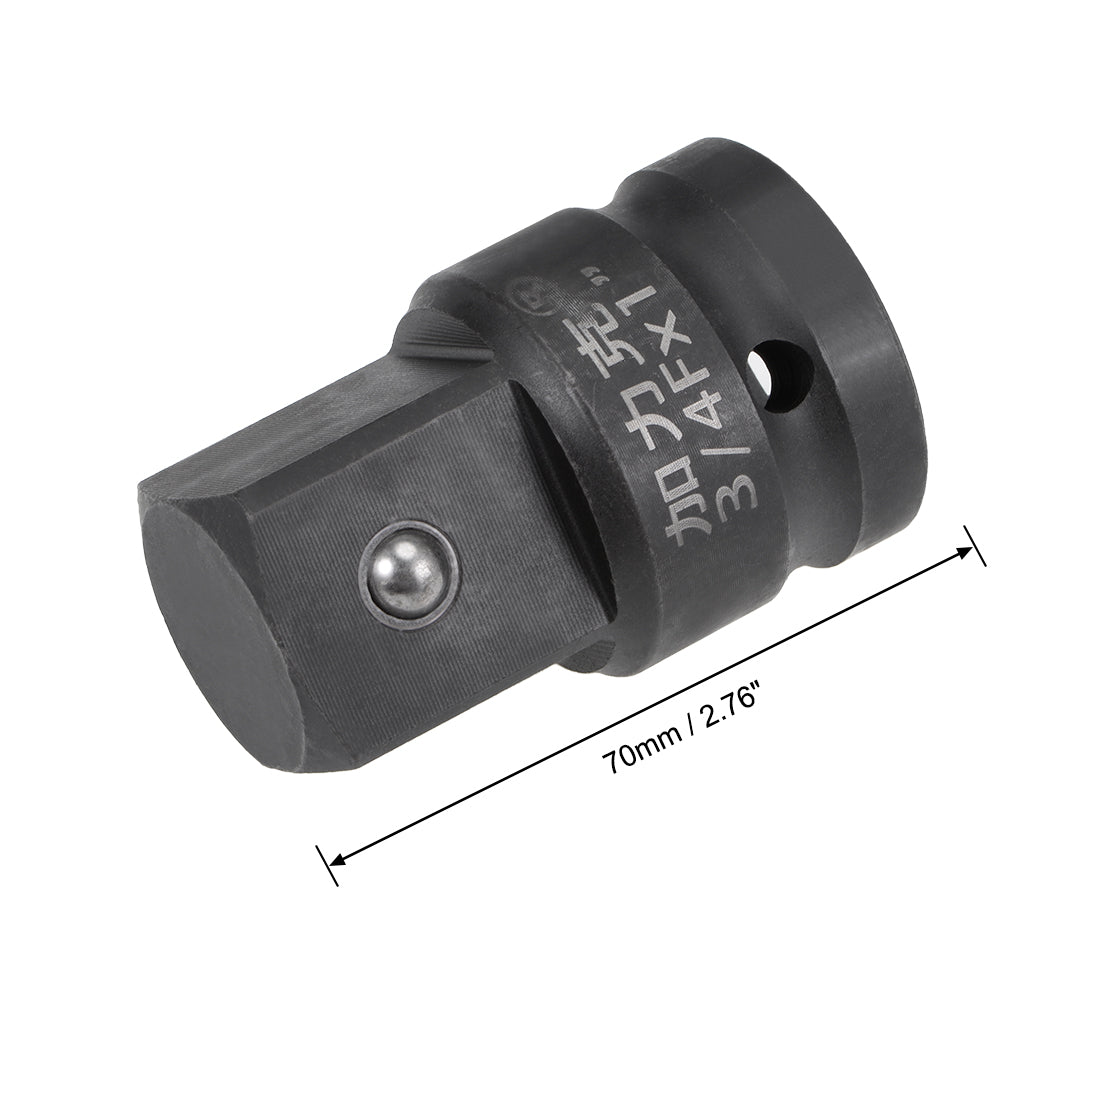 uxcell Uxcell Impact Socket Reducer and Adapter for Ratchet Wrenches, Female to Male, Cr-Mo